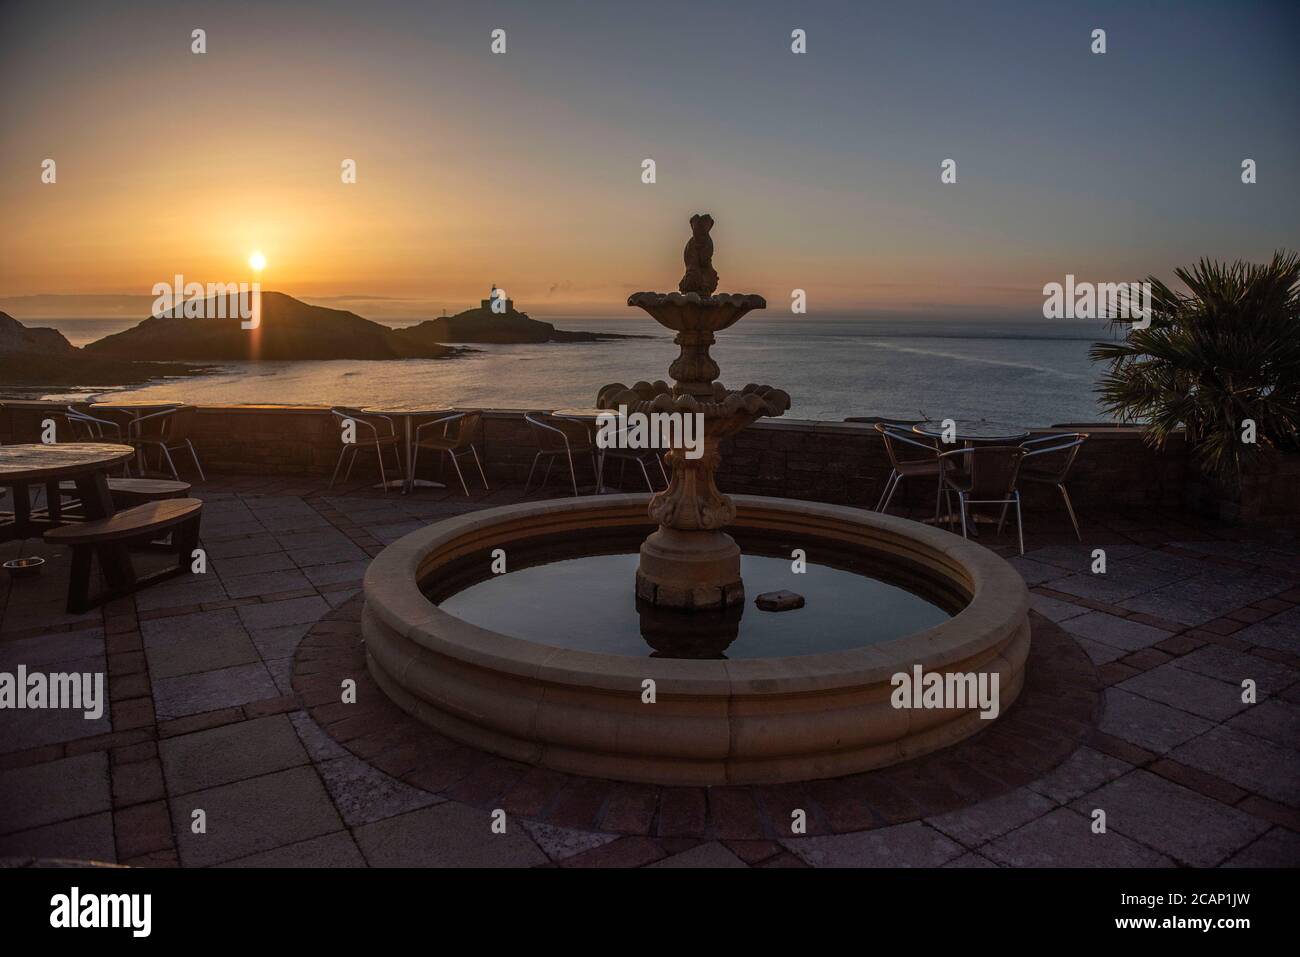 Mumbles, Swansea, UK. 8th Aug, 2020. The sun rises over the Mumbles Lighthouse near Swansea this morning as seen from outside Castellamare Restaurant at the start of a stunning UK summers day. Credit: Phil Rees/Alamy Live News Stock Photo